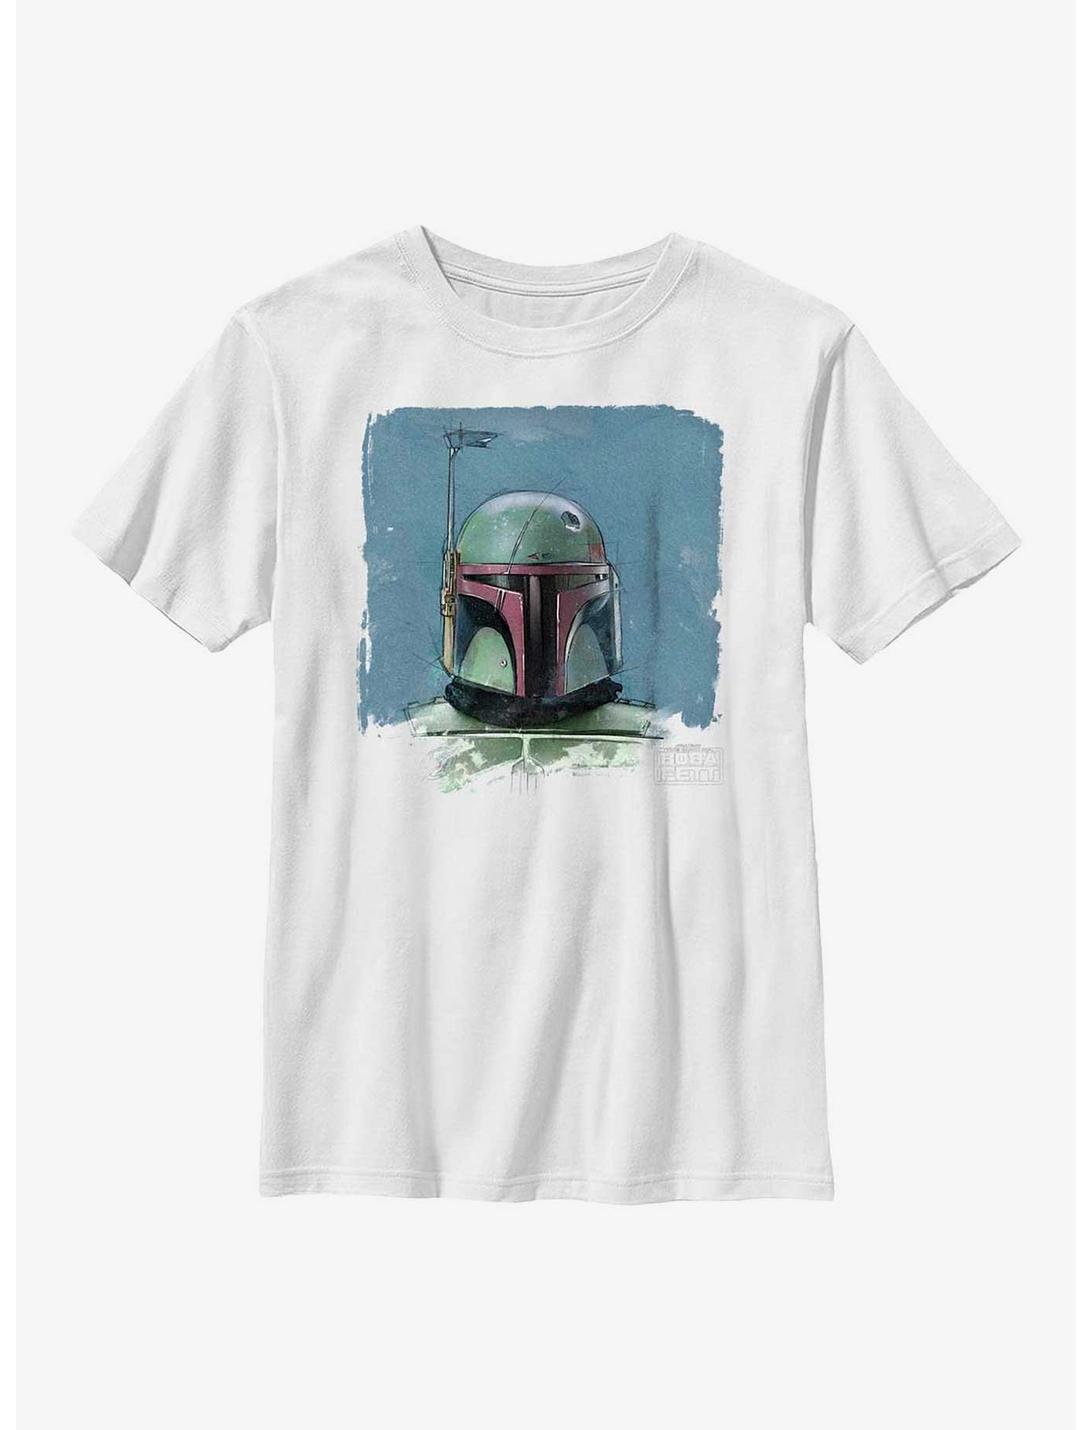 Star Wars: The Book Of Boba Fett Sketch Portrait Youth T-Shirt, WHITE, hi-res